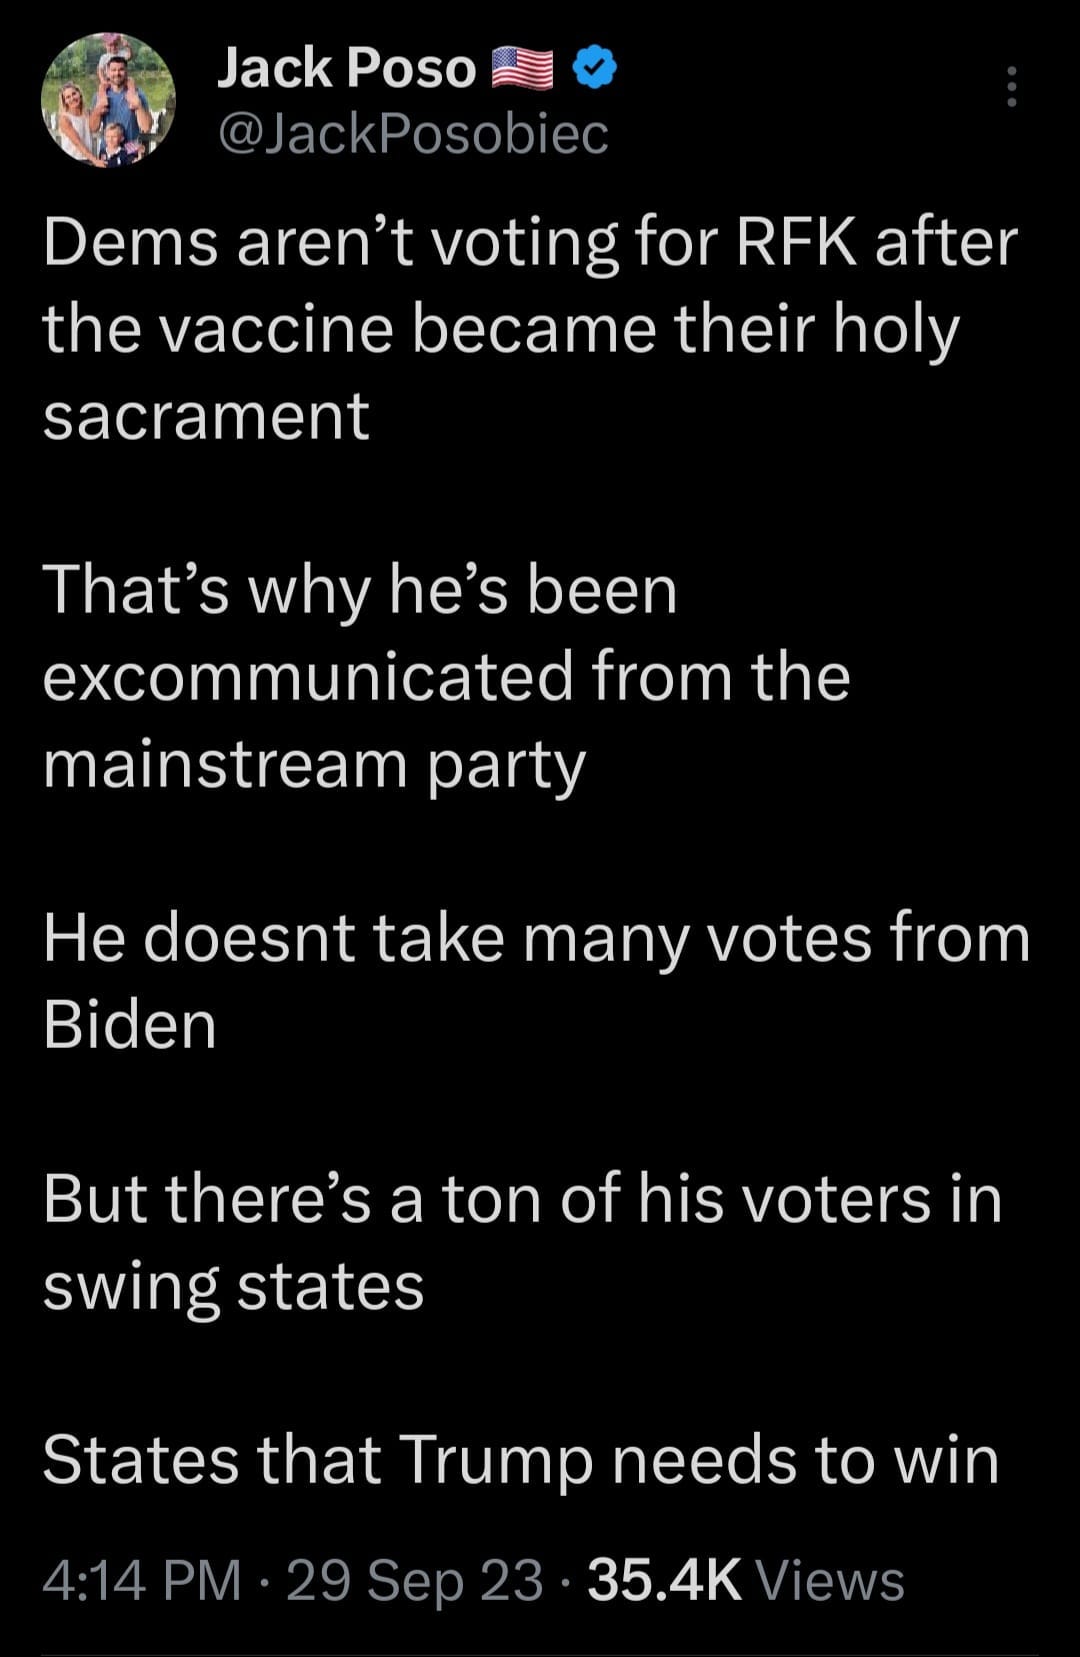 May be an image of 1 person and text that says 'Jack Poso @JackPosobiec Dems aren' voting for RFK after the vaccine became their holy sacrament That's why he's been excommunicated from the mainstream party He doesnt take many votes from Biden But there's a ton of his voters in swing states States that Trump needs to win 4:14 PM 29 Sep 23 35.4K Views'